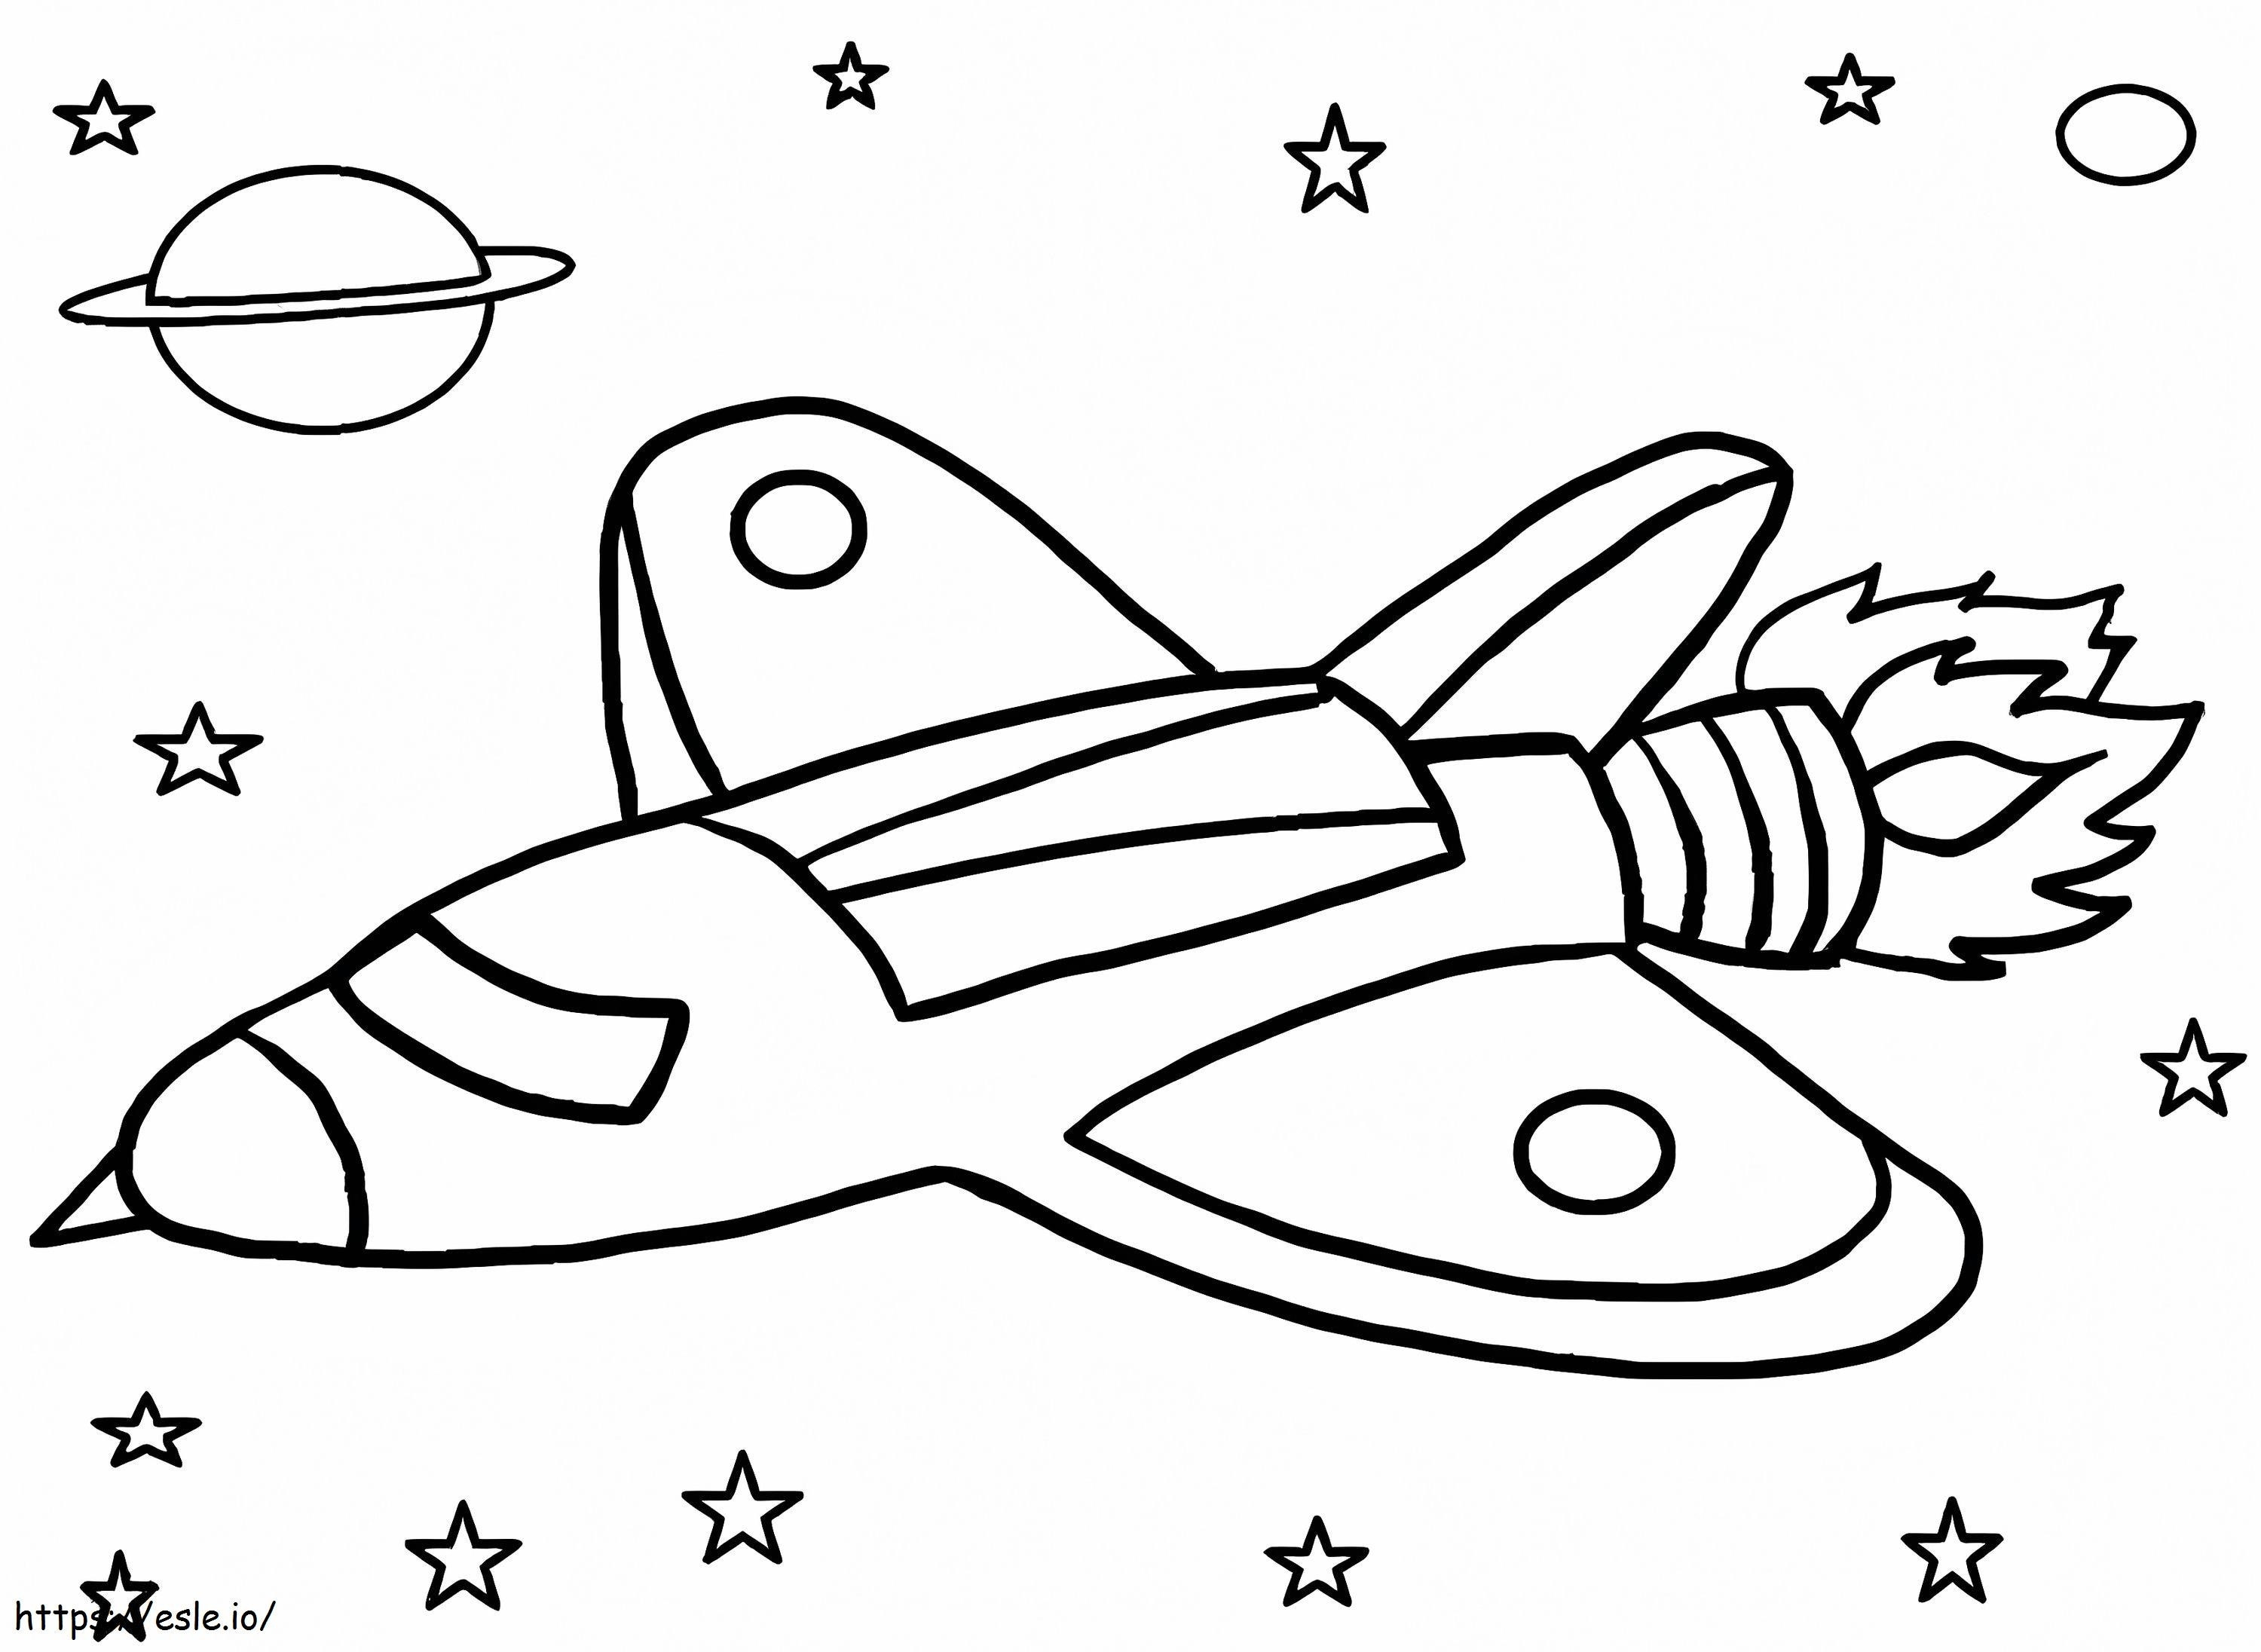 Spaceship For Kids coloring page